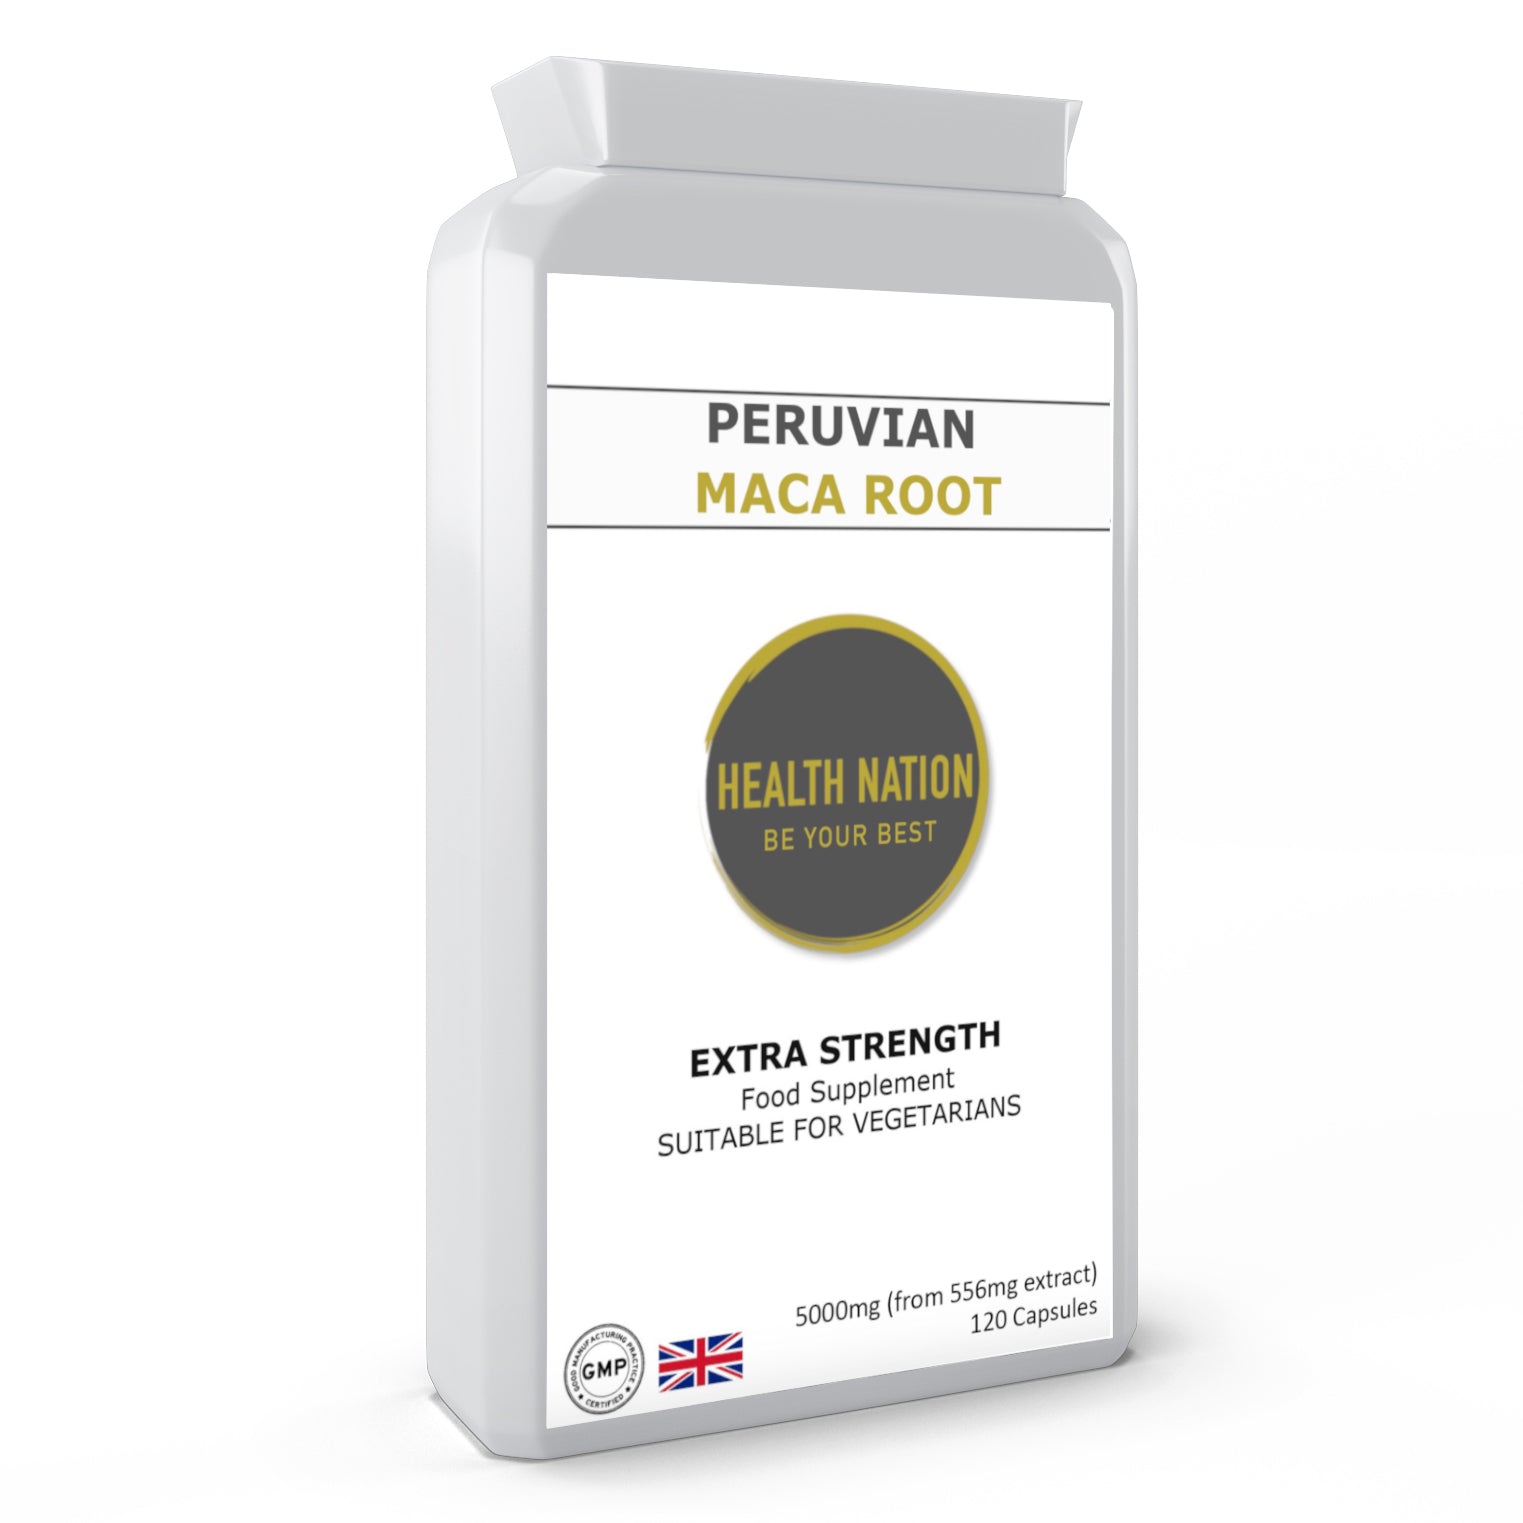 Peruvian Maca Root | Helps with Anxiety, Stress, Fertility, Sexual Health, Balances Hormones, Mood and Energy | Made in UK | 5000mg 120 Capsules